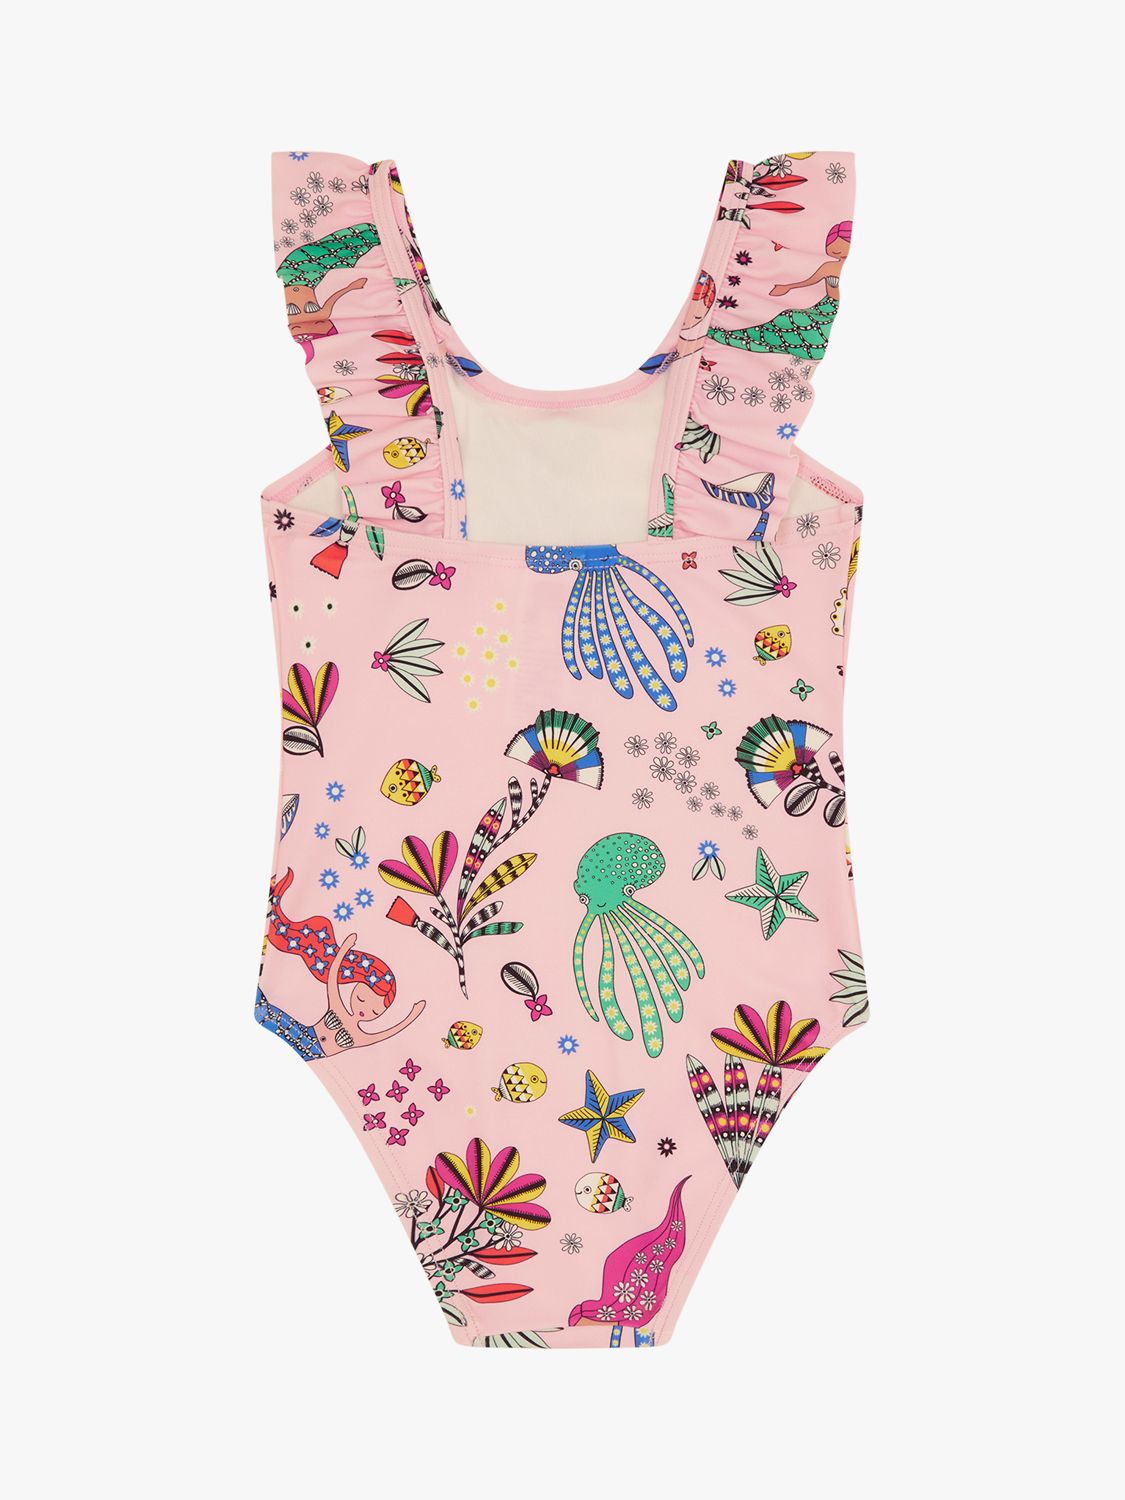 Angels by Accessorize Kids' Mermaid Print Frill Swimsuit, Pink/Multi, 18-24M